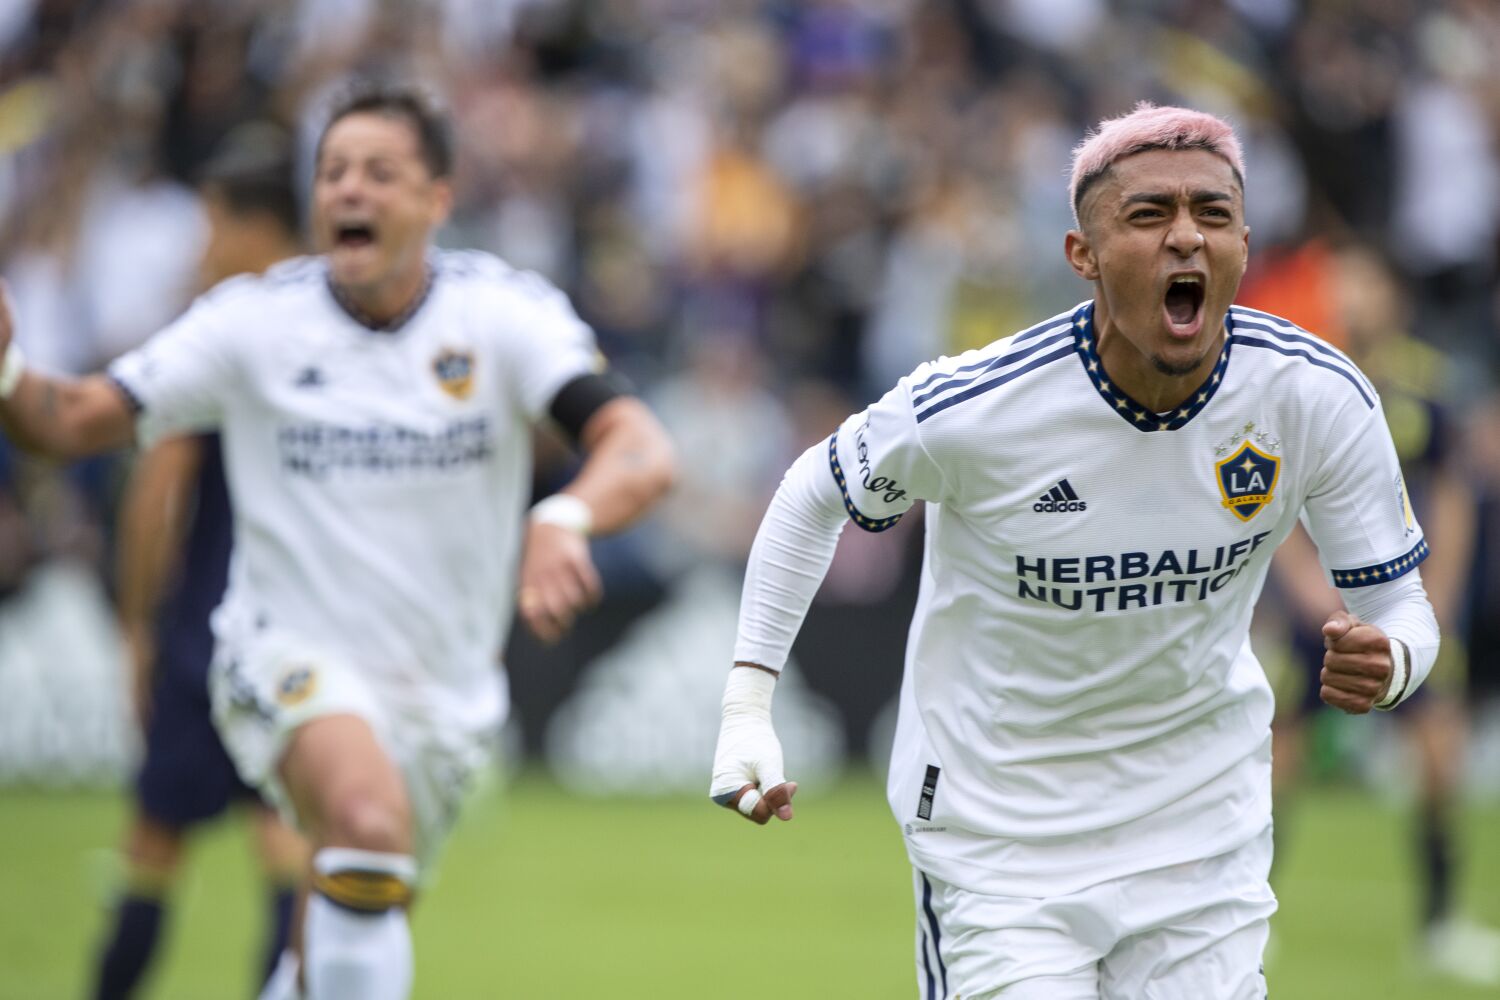 Botched paperwork on Galaxy player transfer missed deadline by 18 seconds